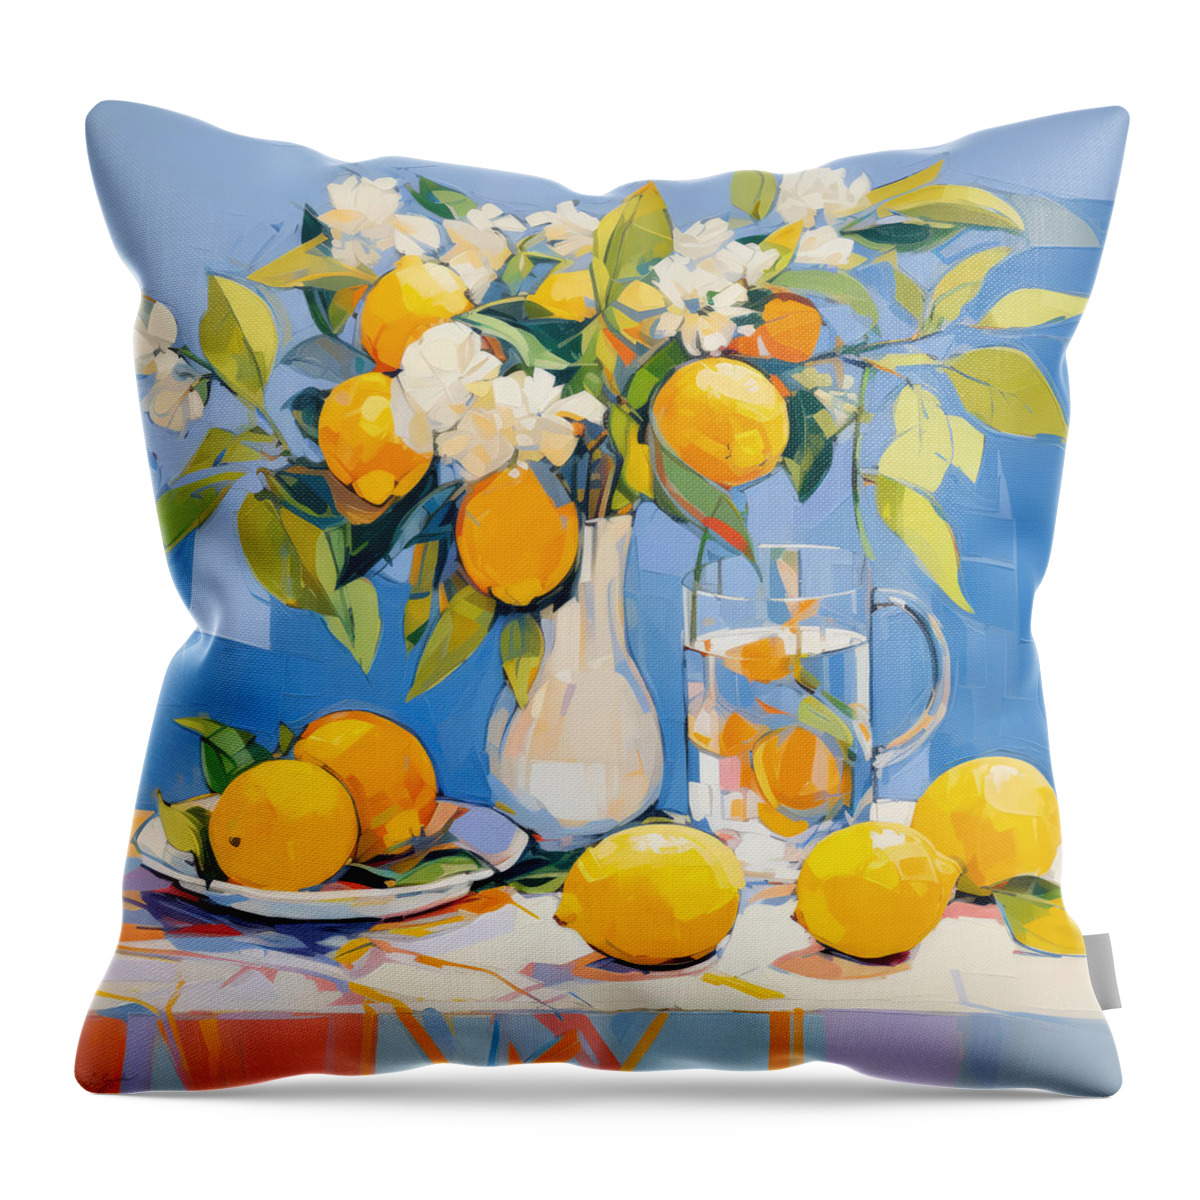 Lemons Throw Pillow featuring the painting Lemons Still Life by Lourry Legarde